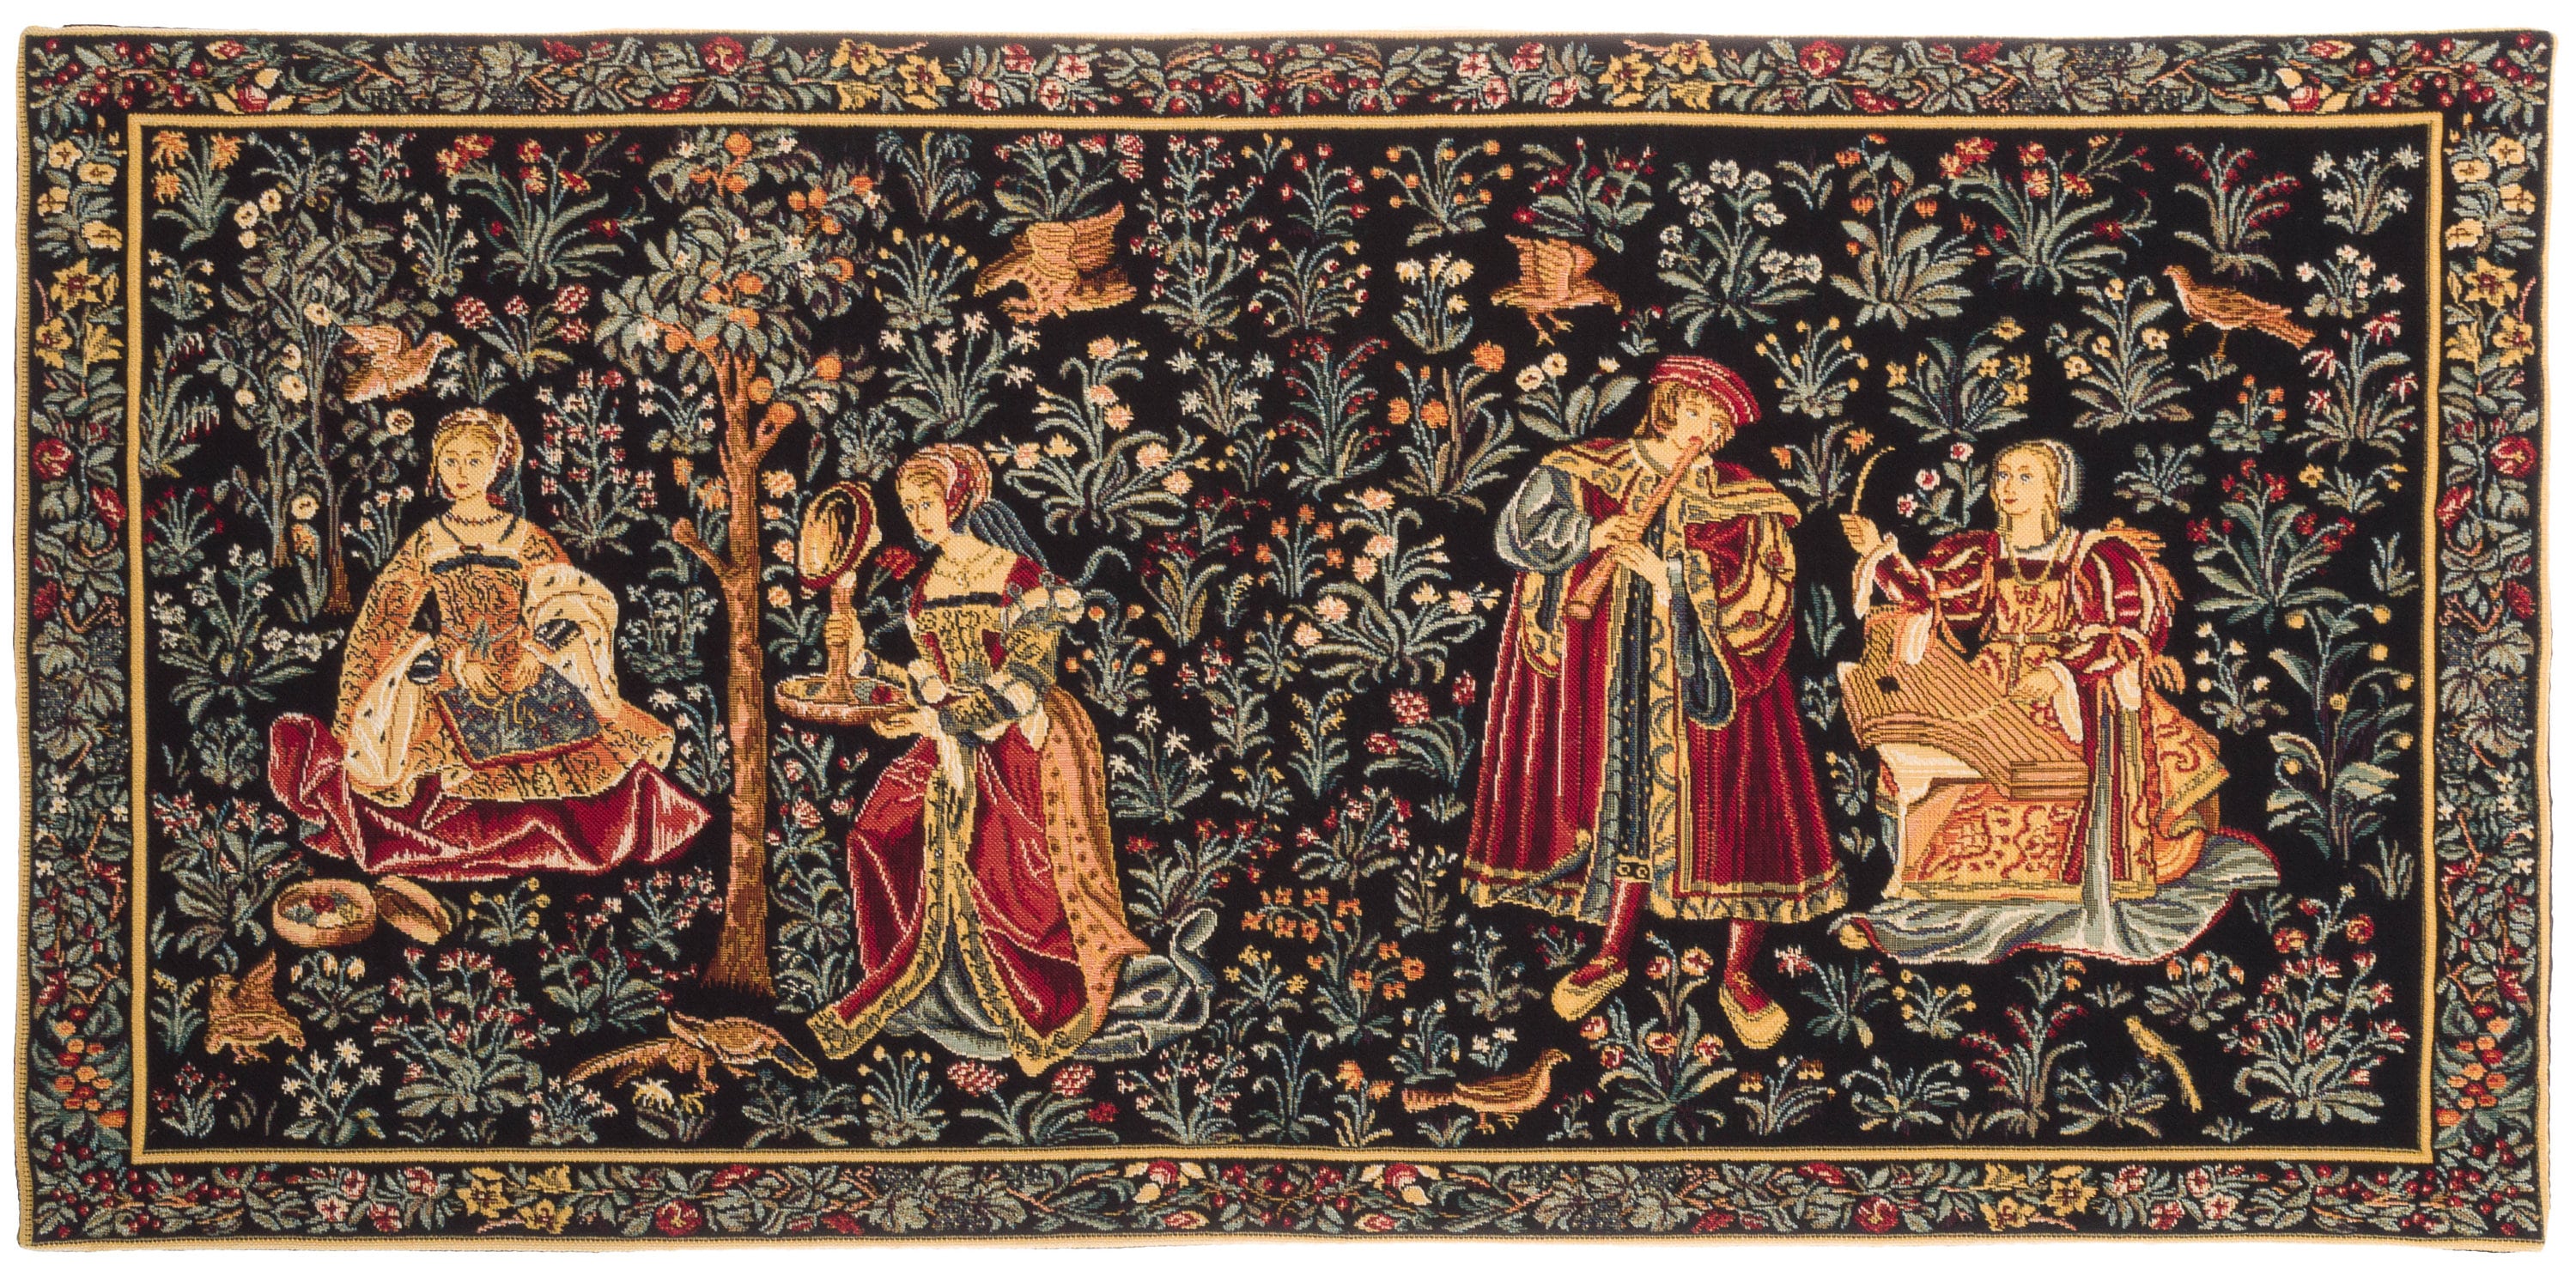 Medieval Tapestry Wall Hanging - Seignorial Scene - Millefleurs motif